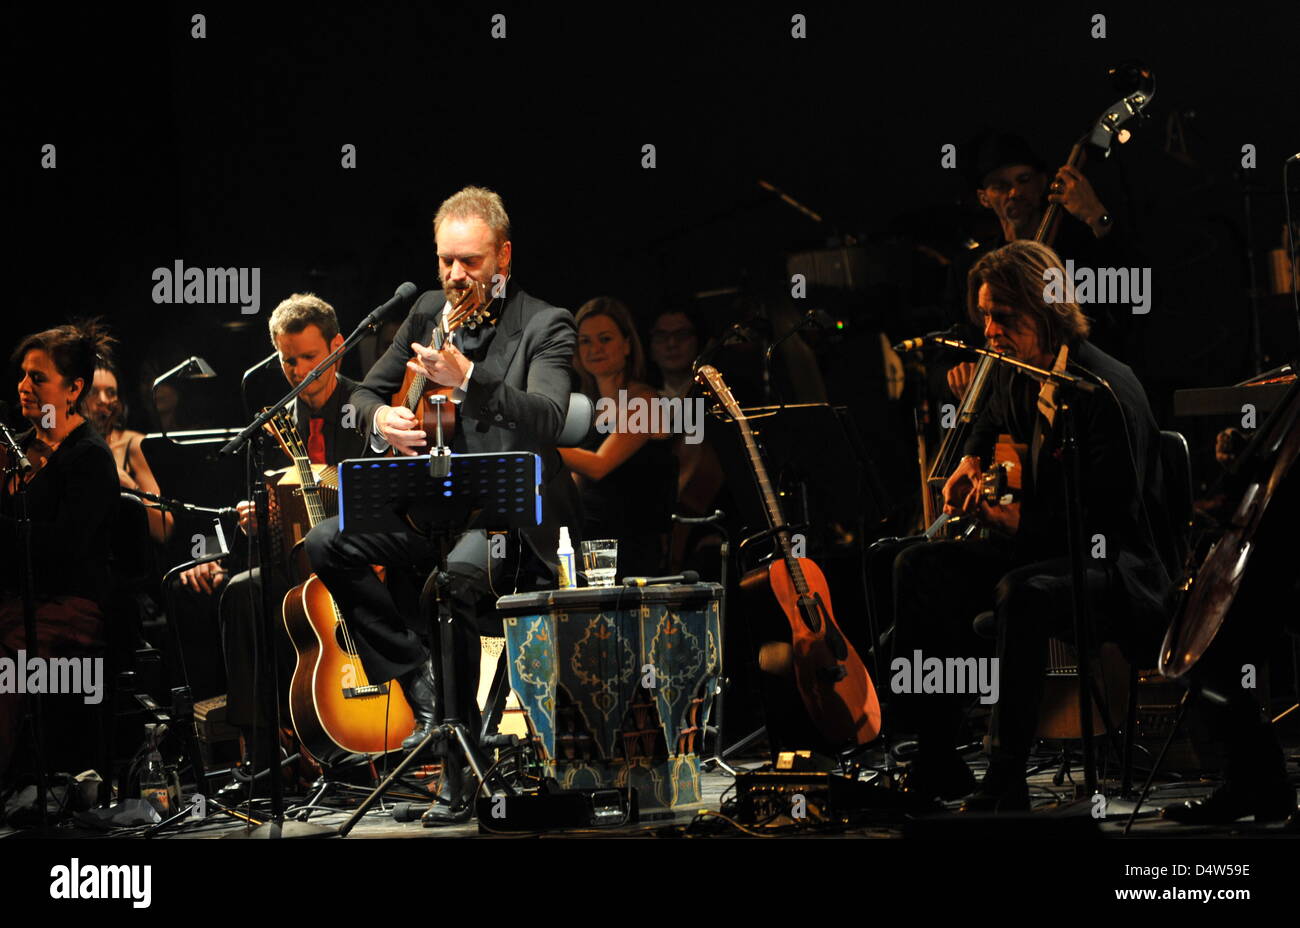 British singer Sting talks to his audience during his concert at the 'Festival Theatre' ('Festspielhaus') in Baden Baden, Germany, 17 December 2009. Sting, former singer of the band 'The Police', presented his new album 'If On A Winter's Night' during his only concert in Germany. Photo: Rolf Haid (ATTENTION: EDITORIAL USE ONLY!) Stock Photo